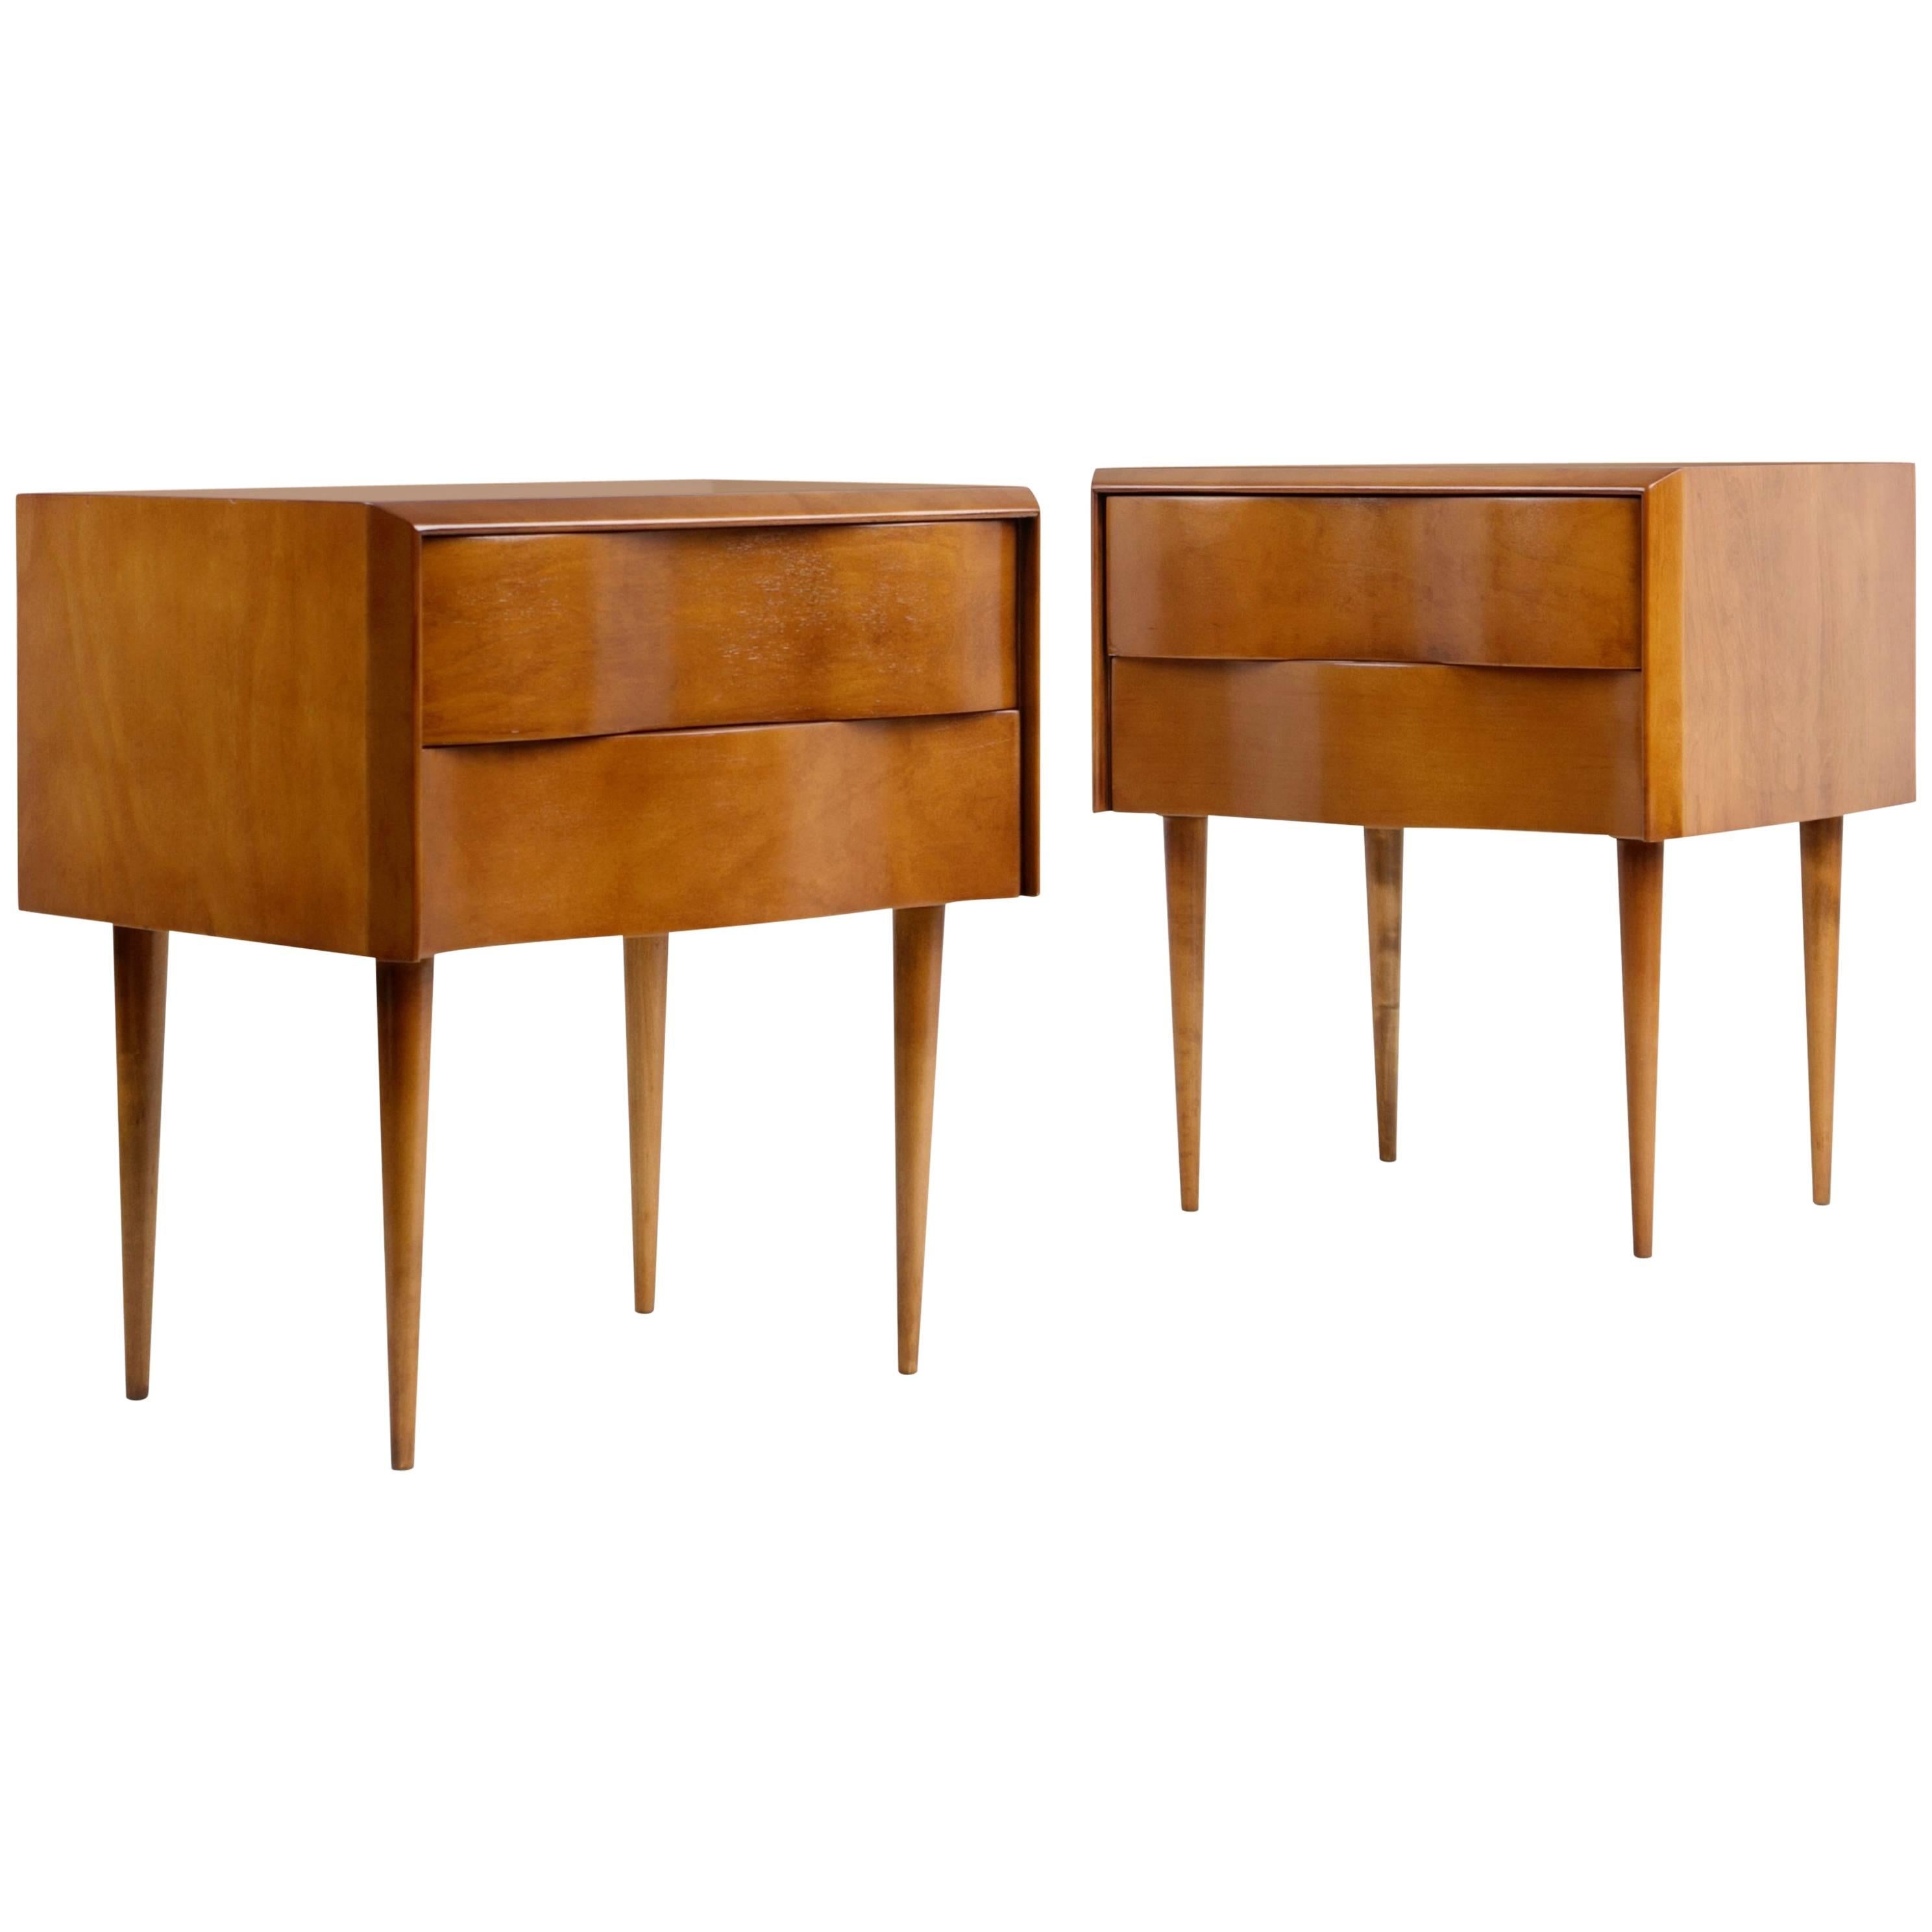 Edmond Spence Wave Front Nightstands, Stamped, circa 1950